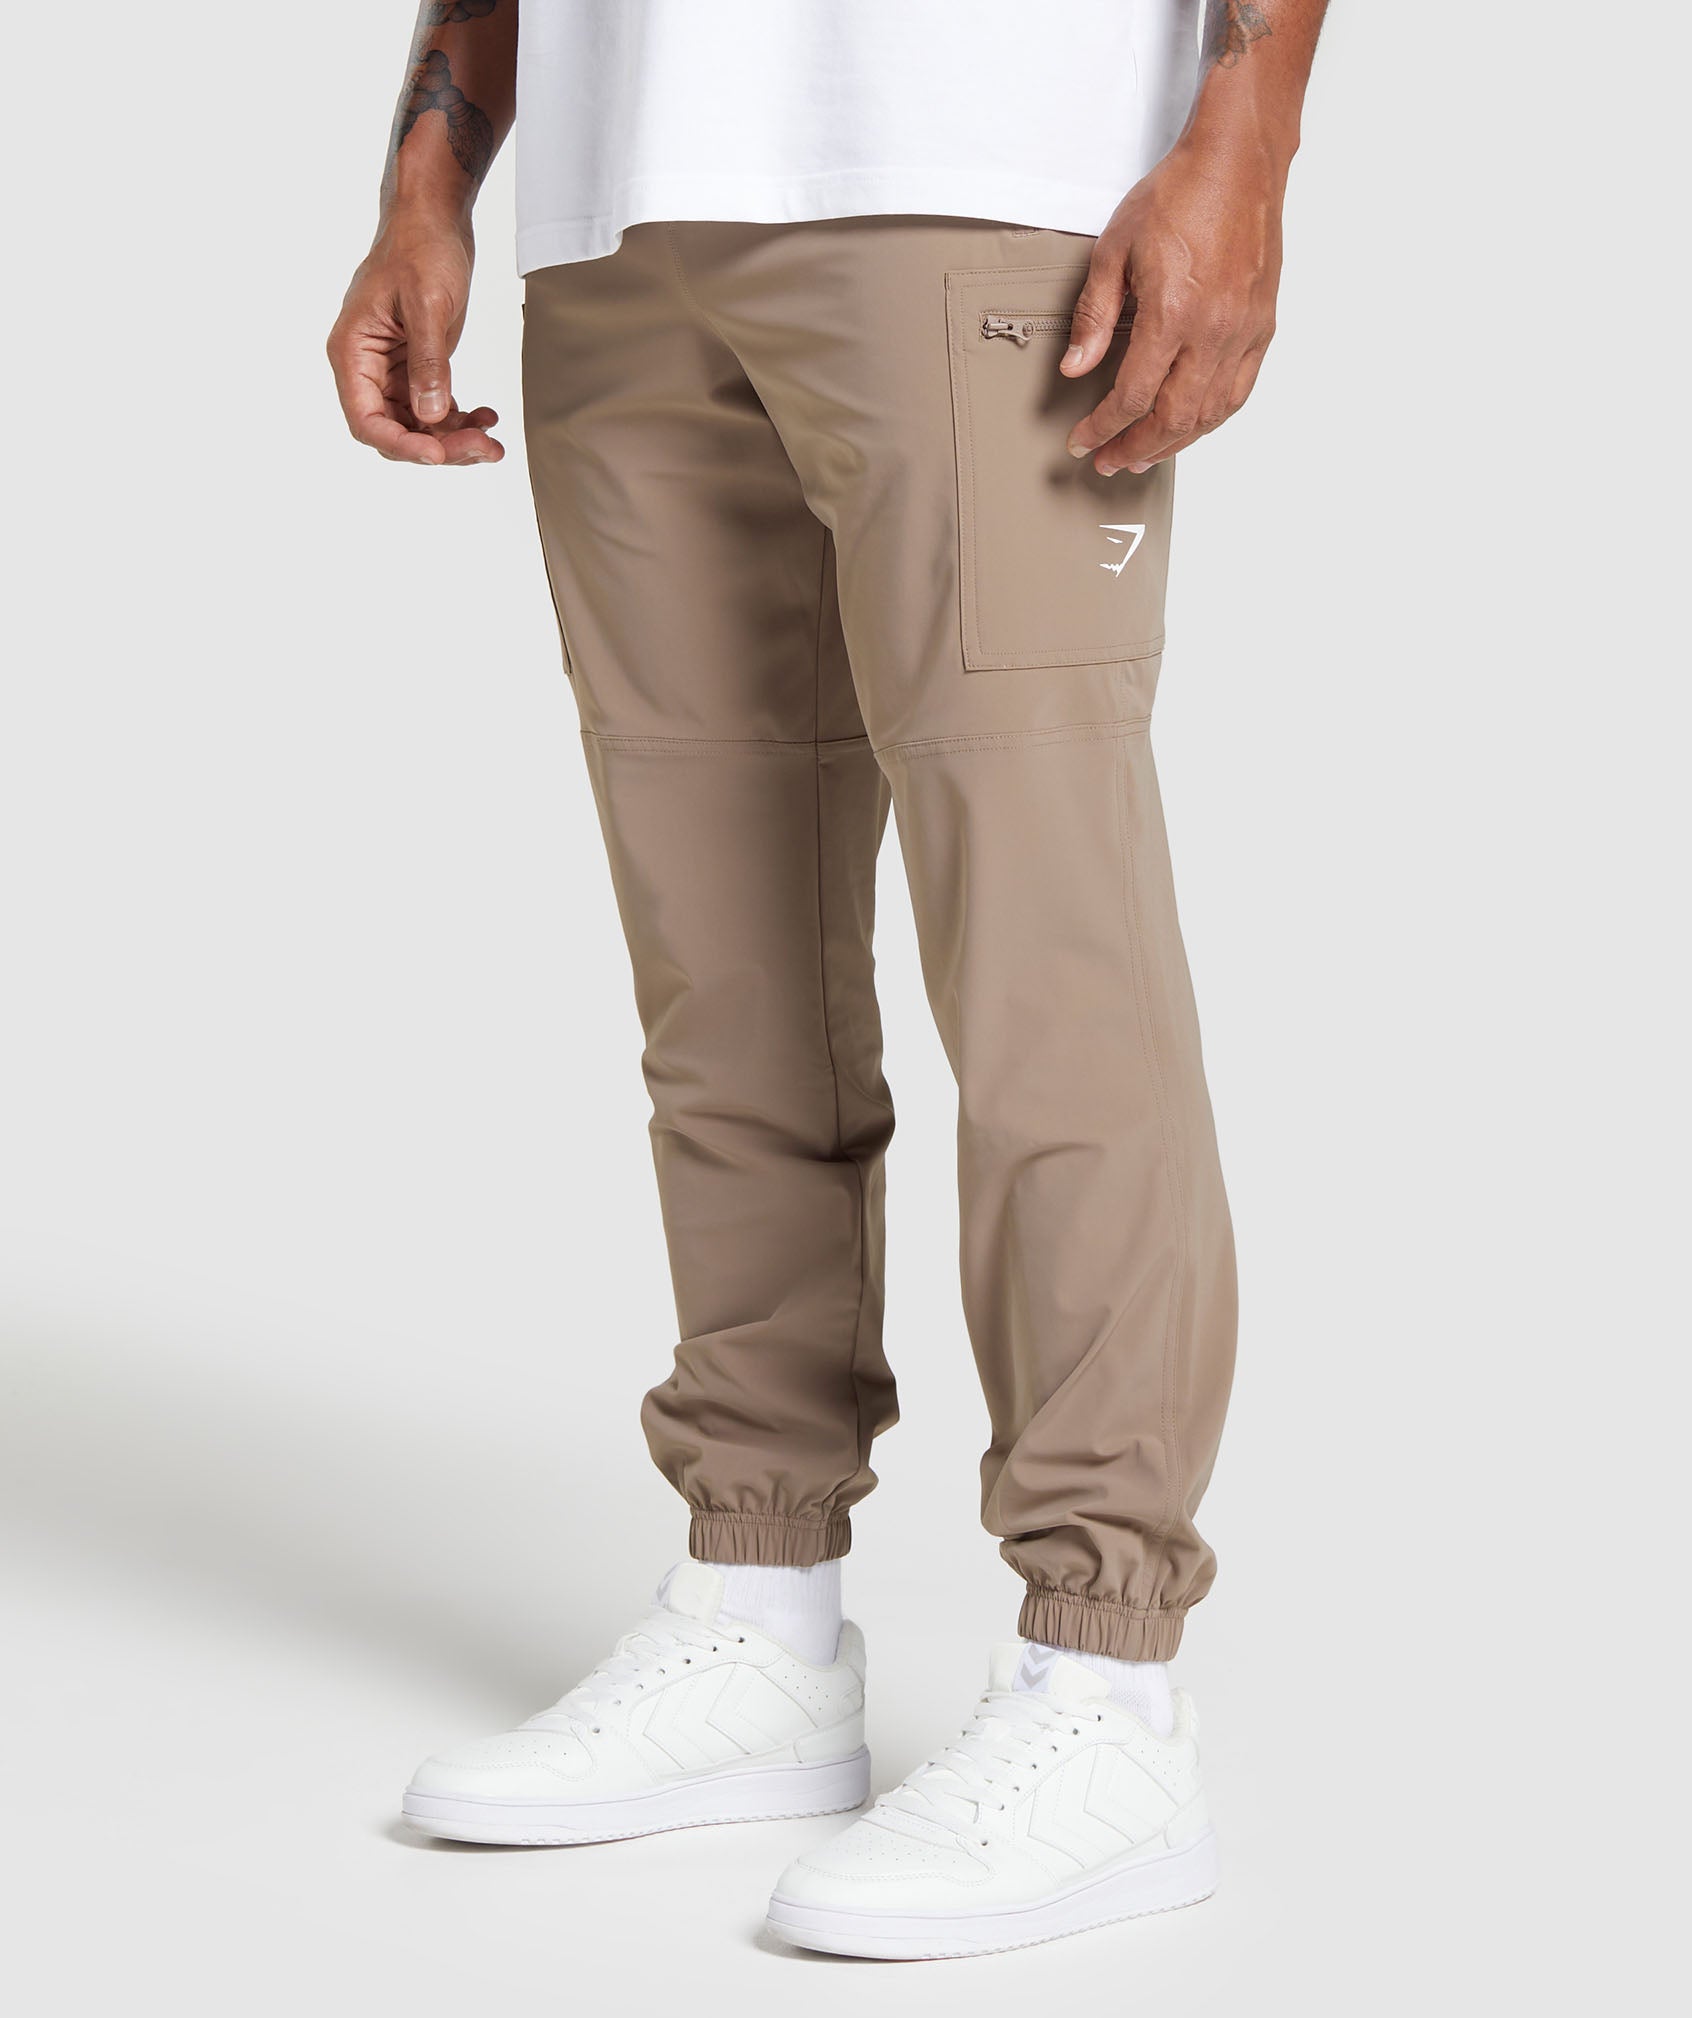 Rest Day Cargo Pants in Mocha Mauve - view 3